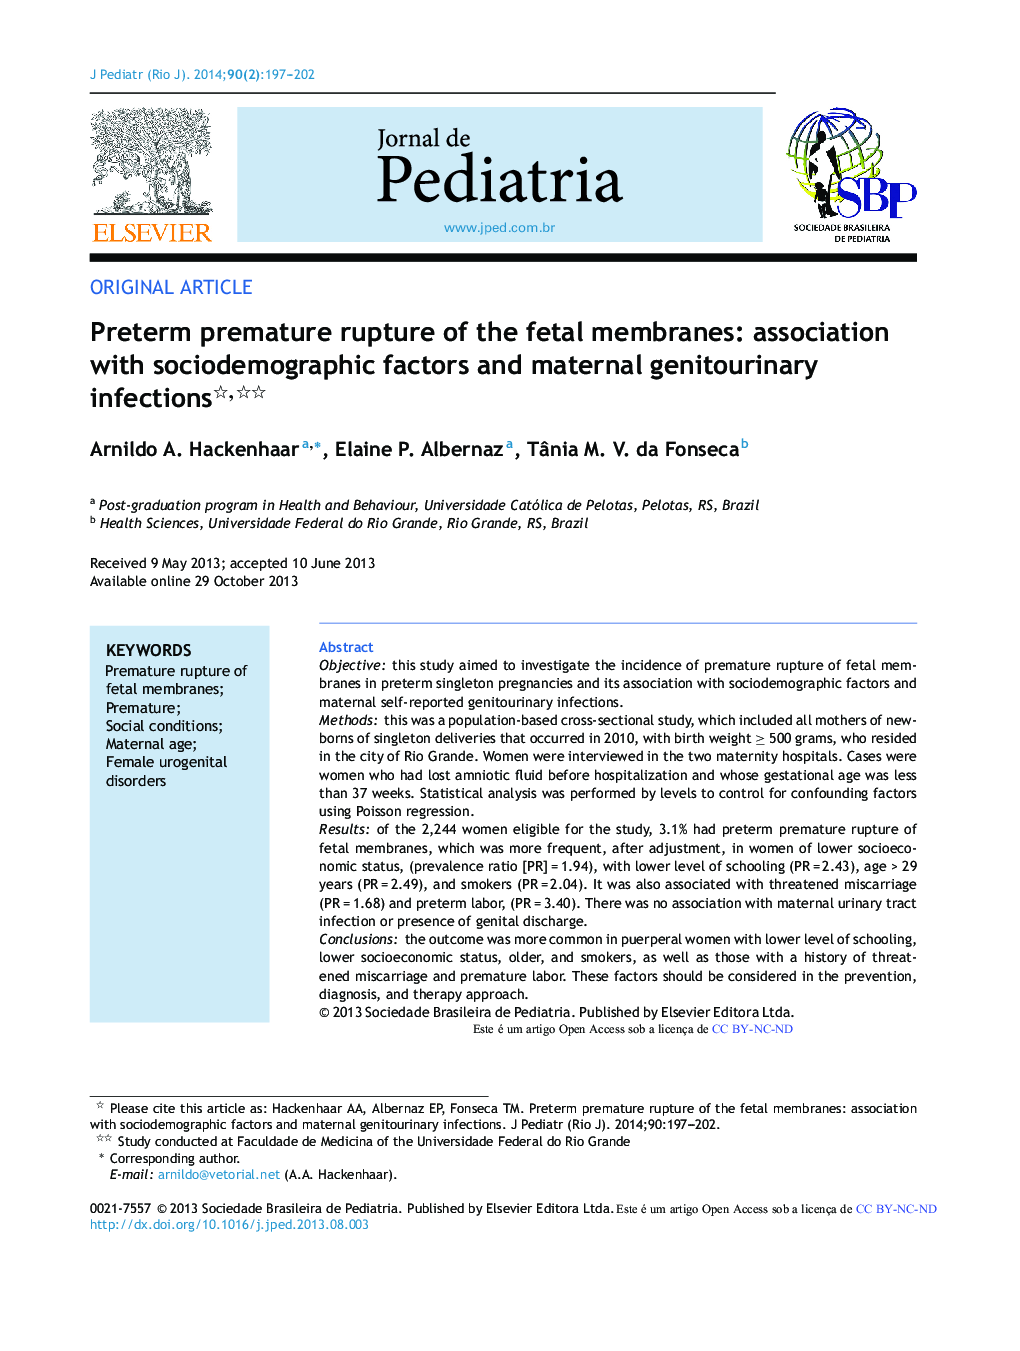 Preterm premature rupture of the fetal membranes: association with sociodemographic factors and maternal genitourinary infections 